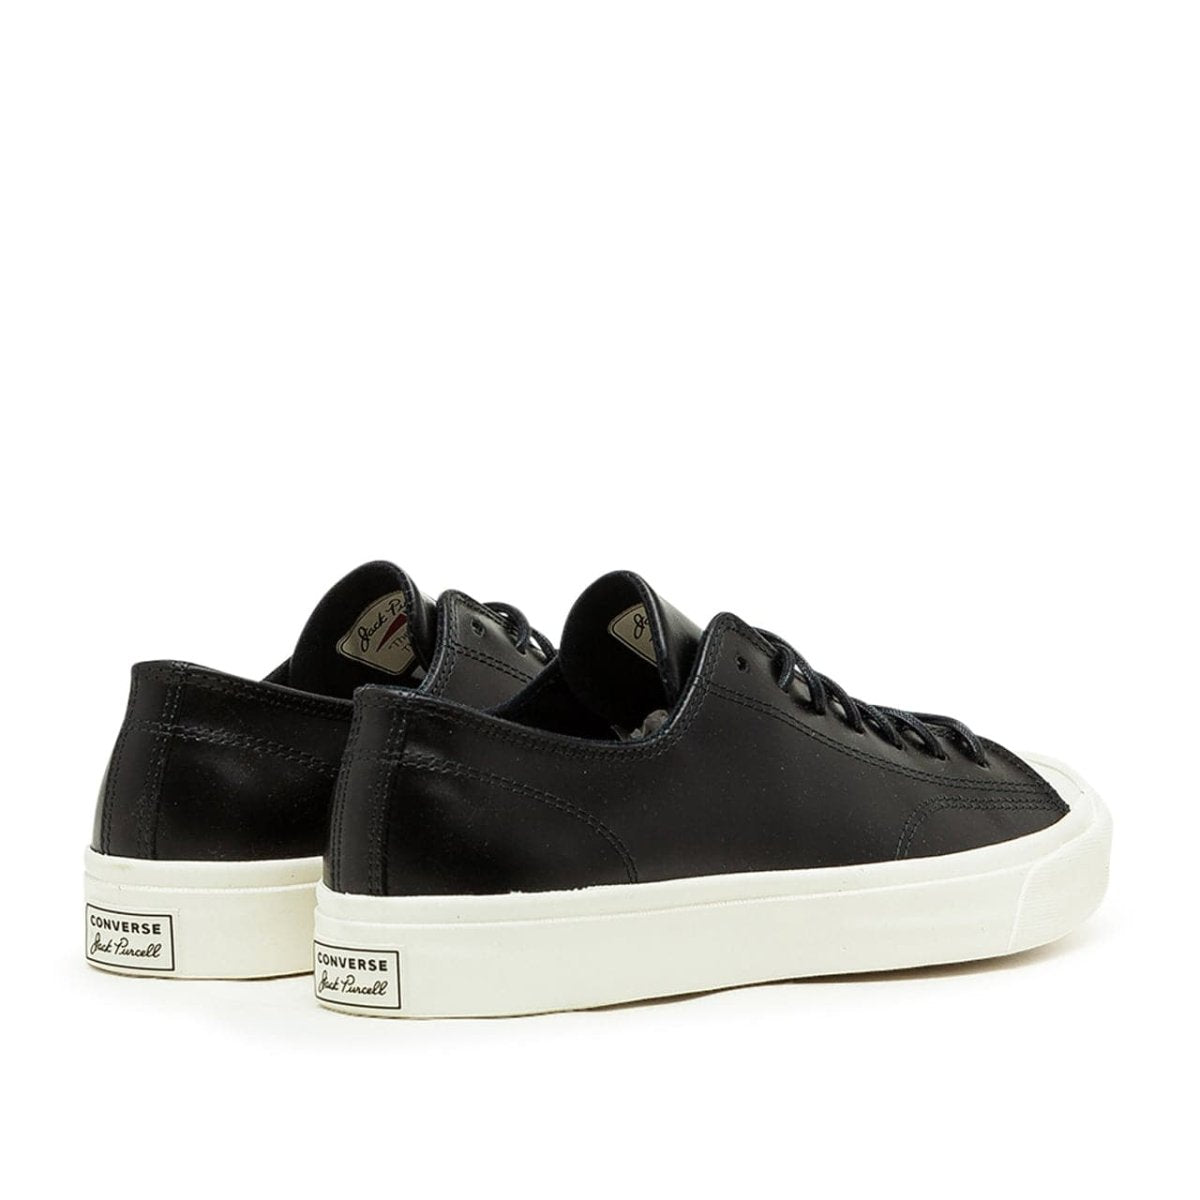 Converse Jack Purcell Leather OX (Schwarz / Weiß)  - Allike Store